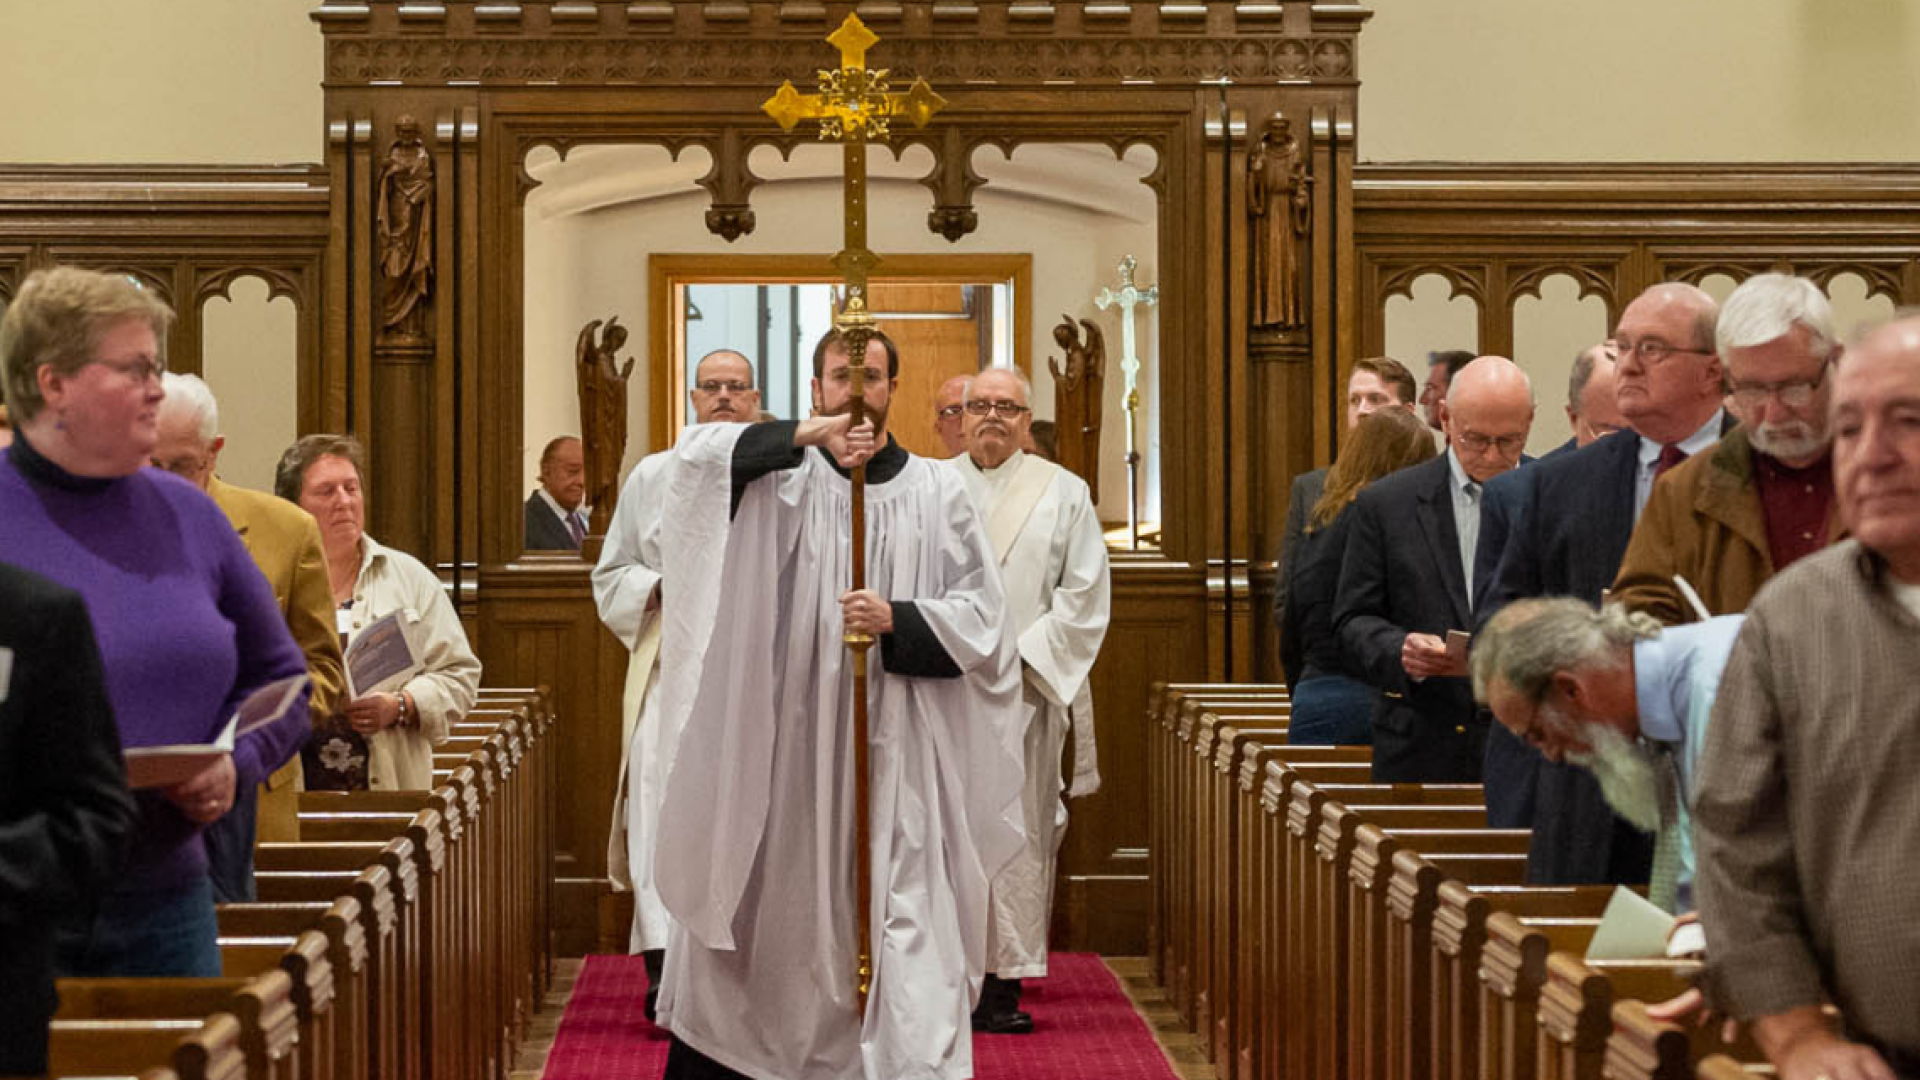 Anglican Diocese of Pittsburgh - Convention Procession